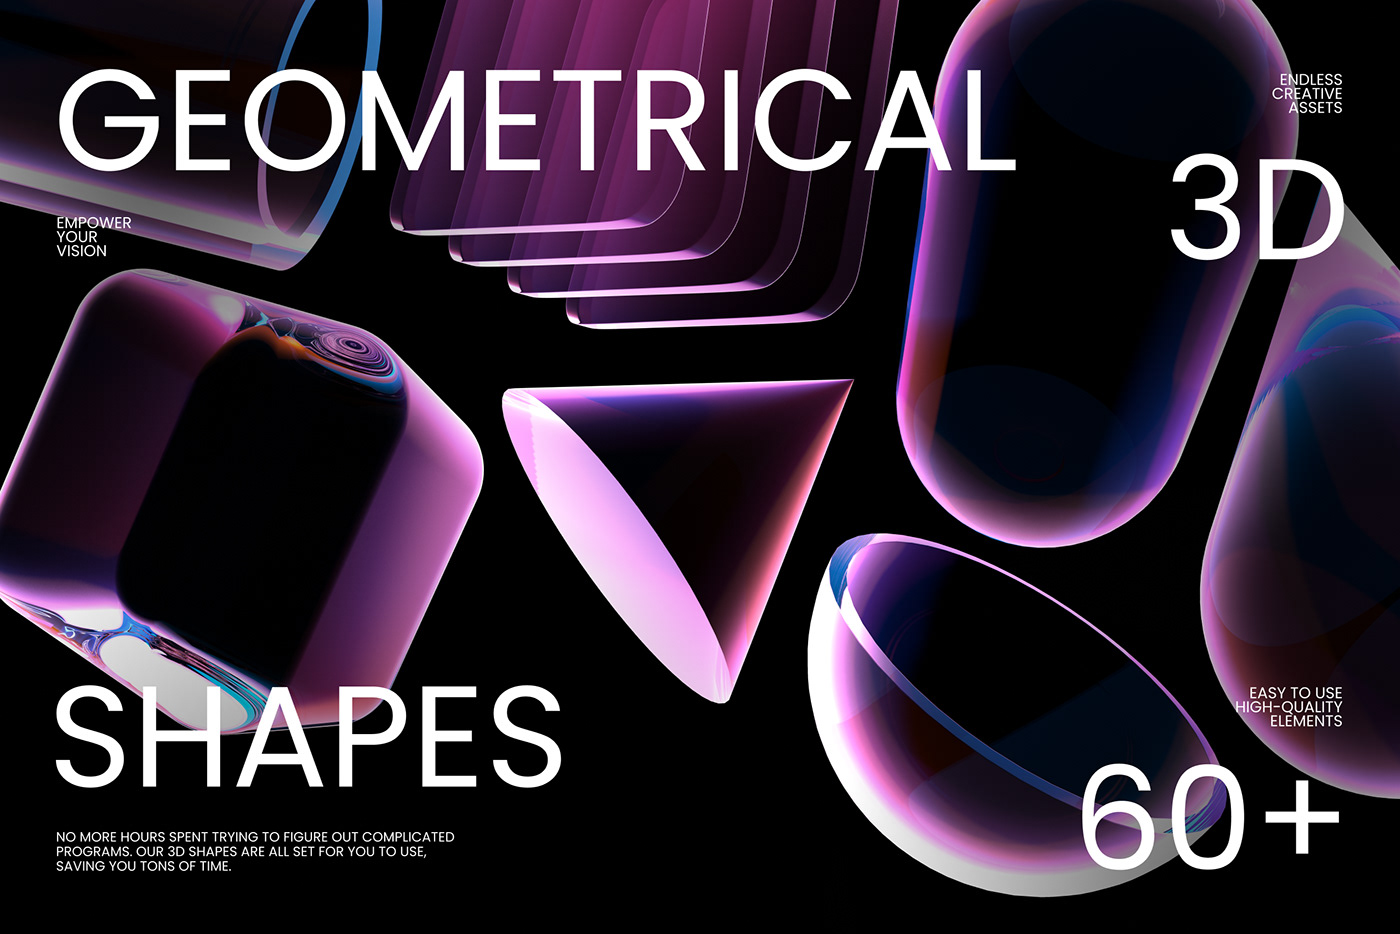 3D 3D shapes geometric geometry assets resources holo holographic download modern